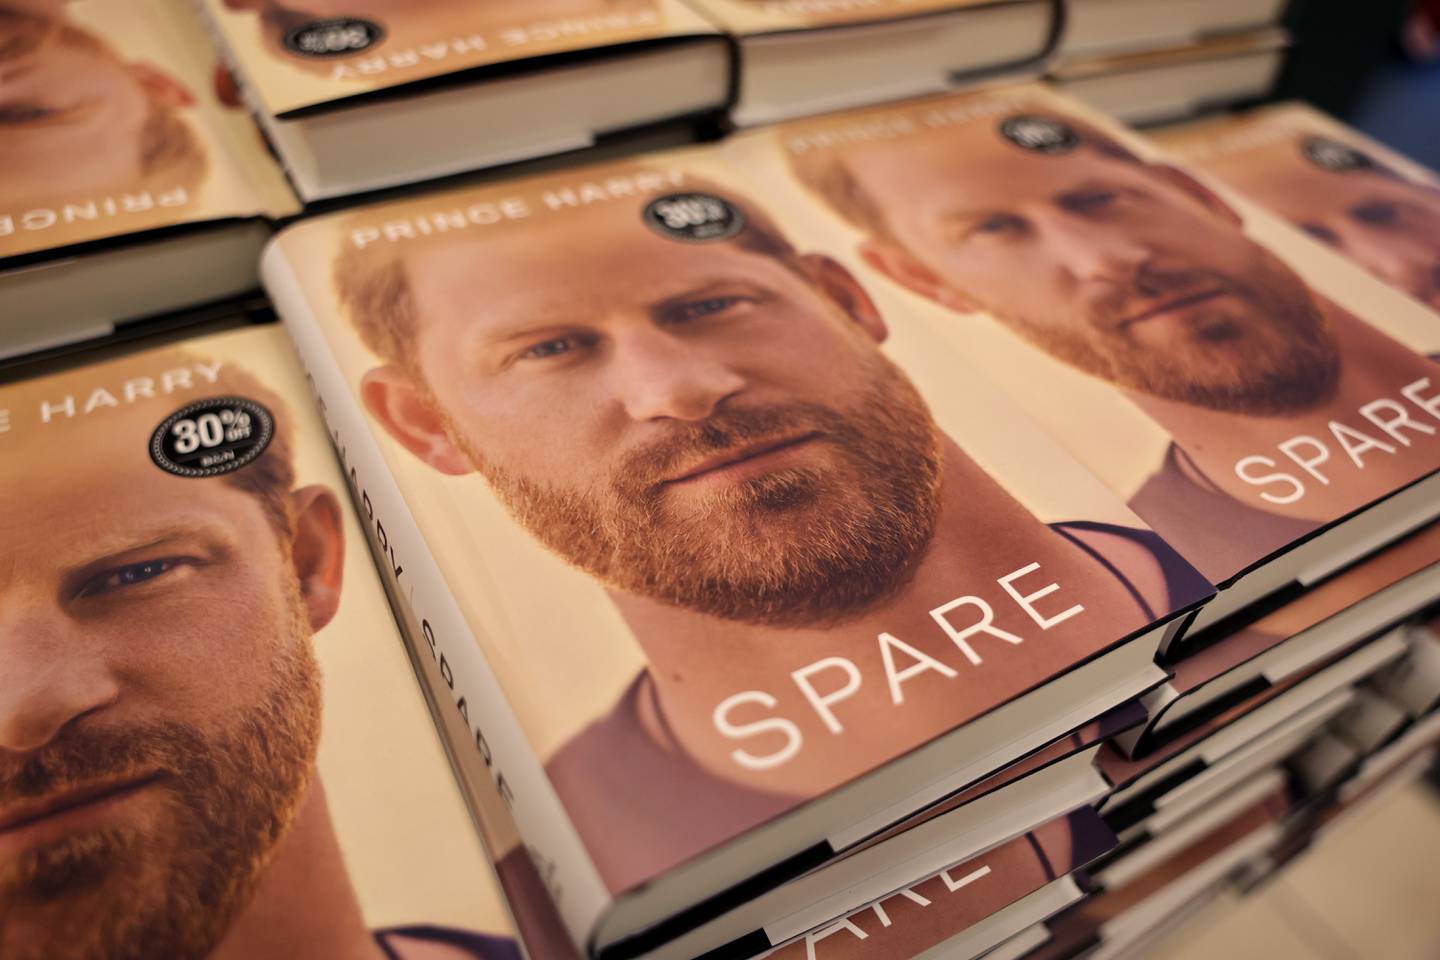 CHICAGO, ILLINOIS - JANUARY 10: Prince Harry's memoir Spare is offered for sale at a Barnes & Noble retail store on January 10, 2023 in Chicago, Illinois. The book went on sale in the United States today.